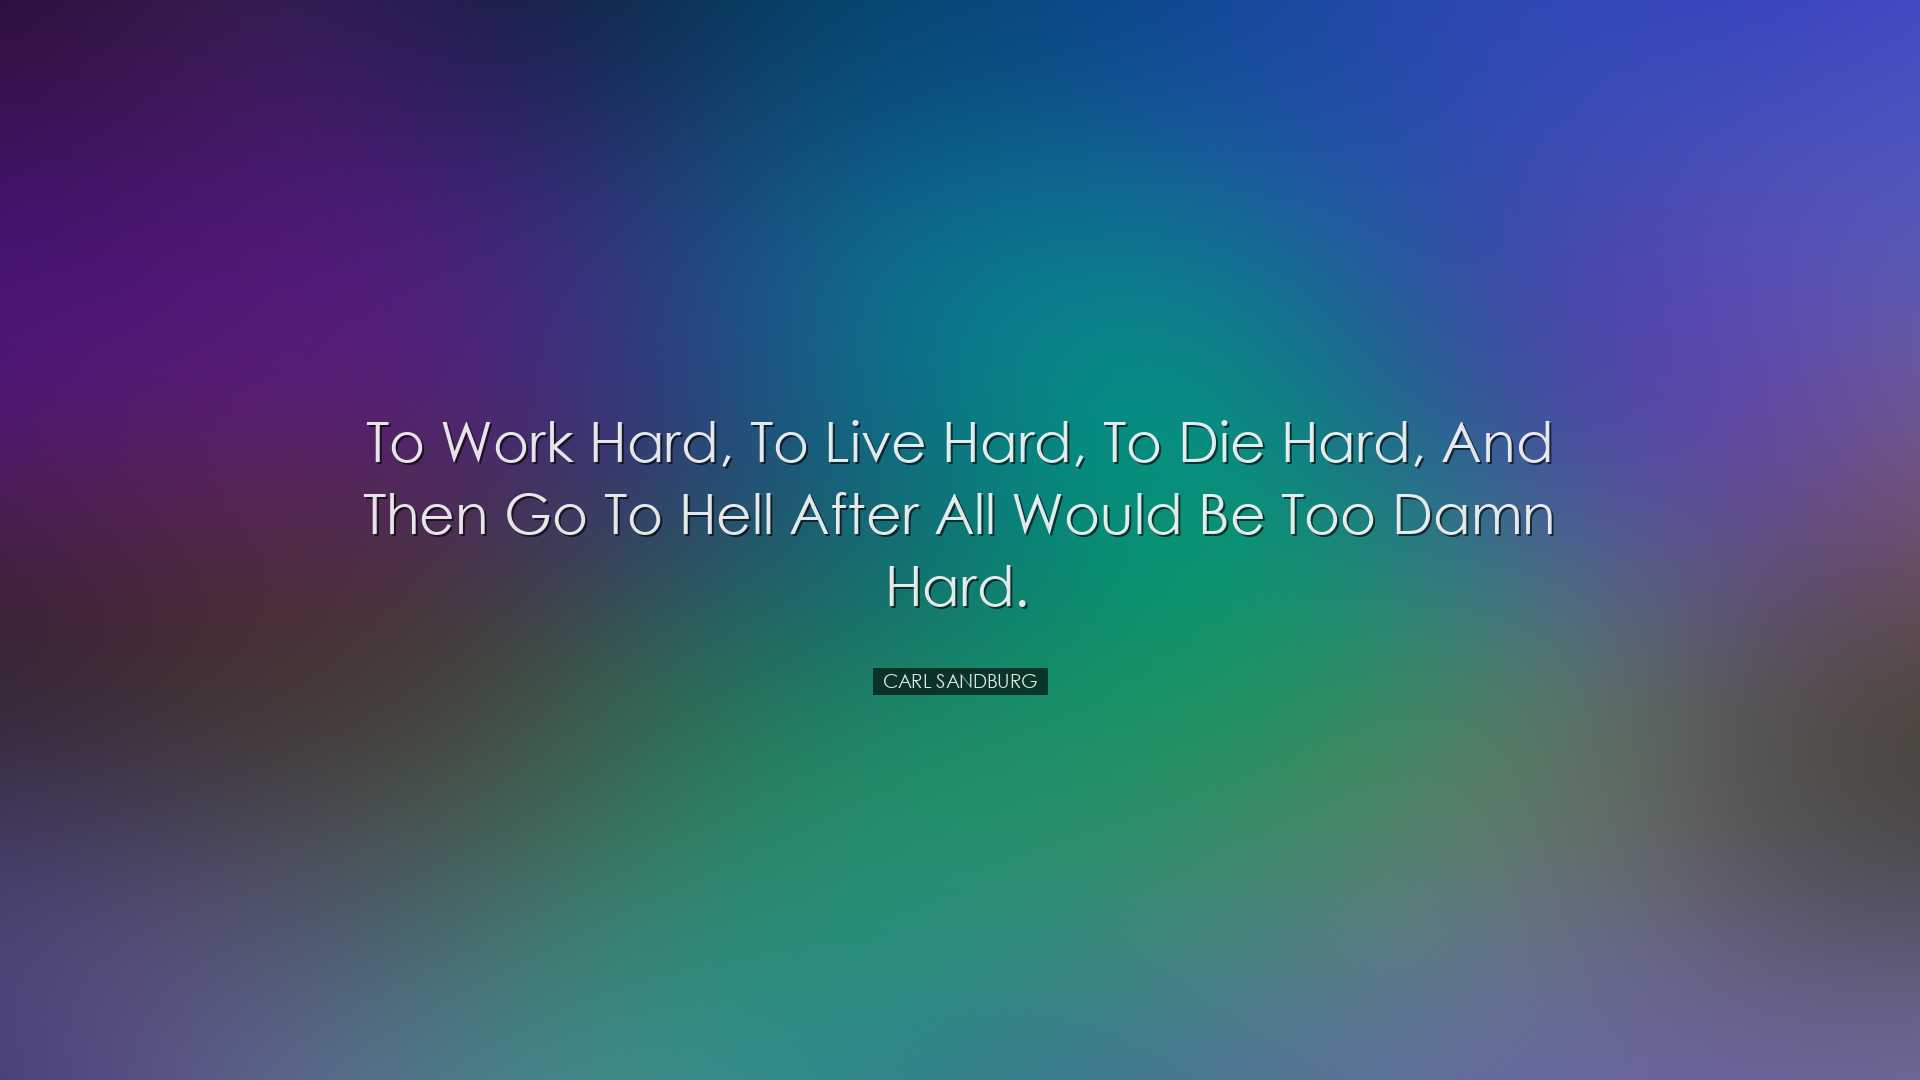 To work hard, to live hard, to die hard, and then go to hell after